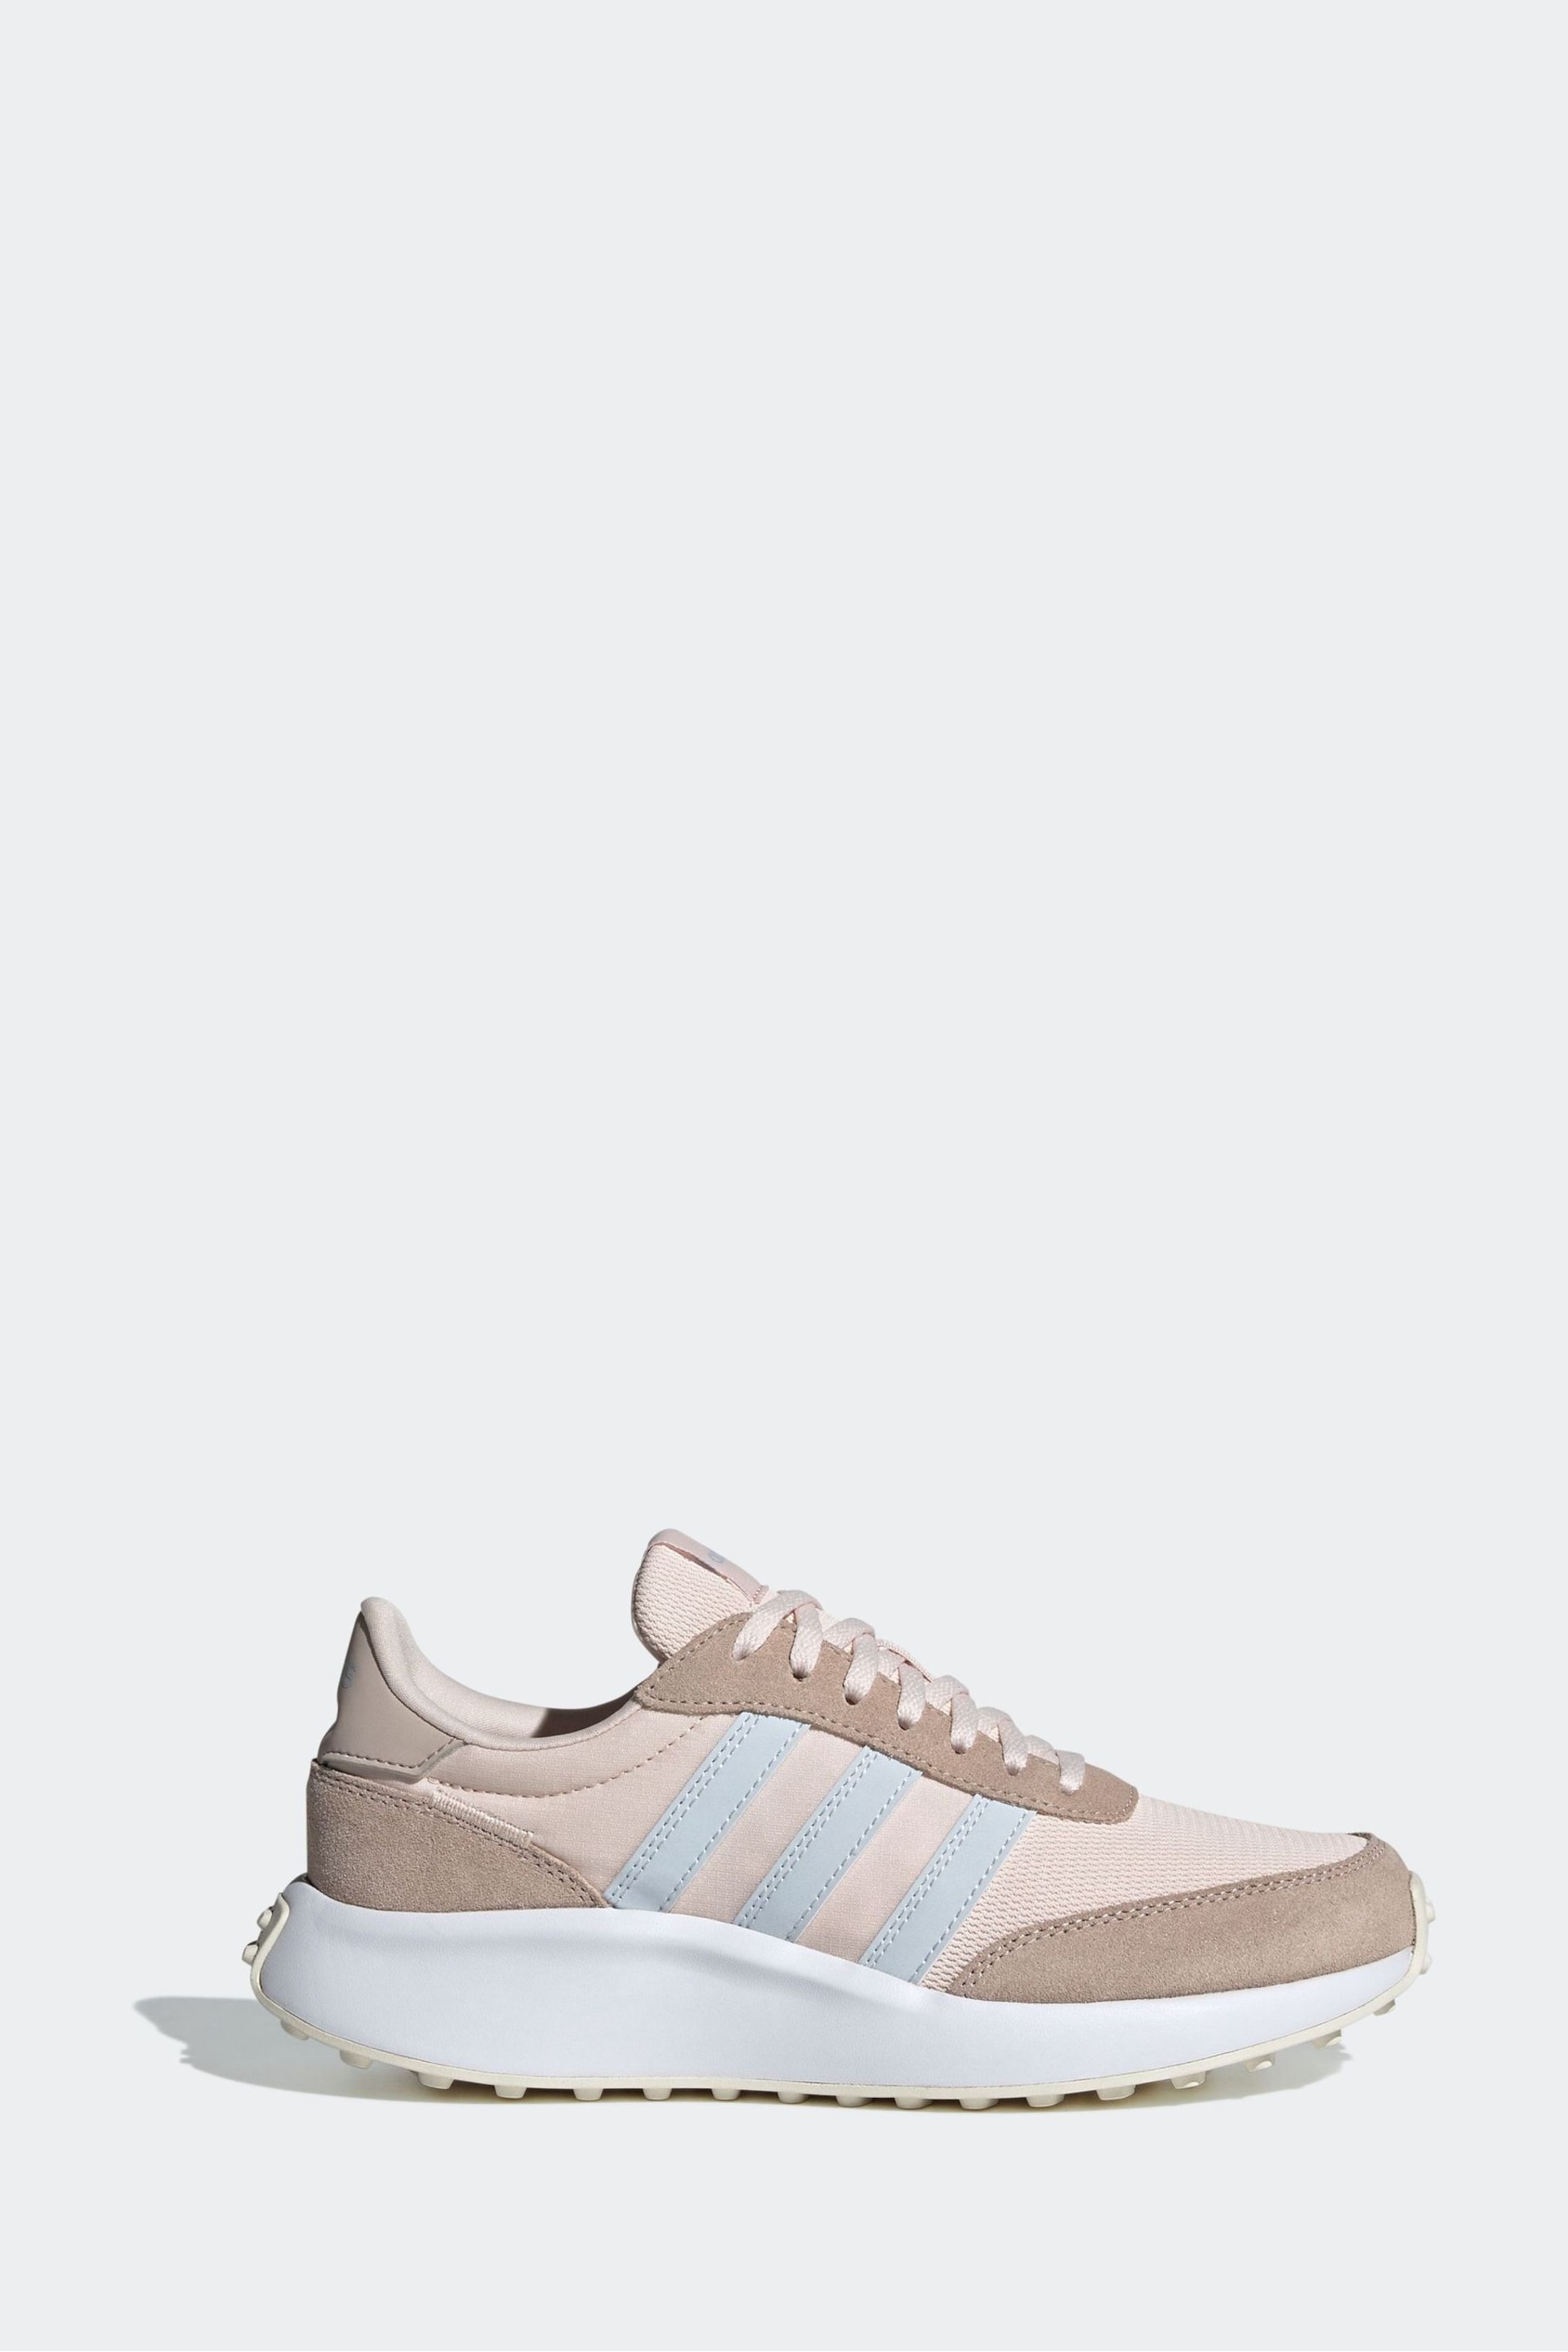 adidas Pink Run 70s Trainers - Image 1 of 9